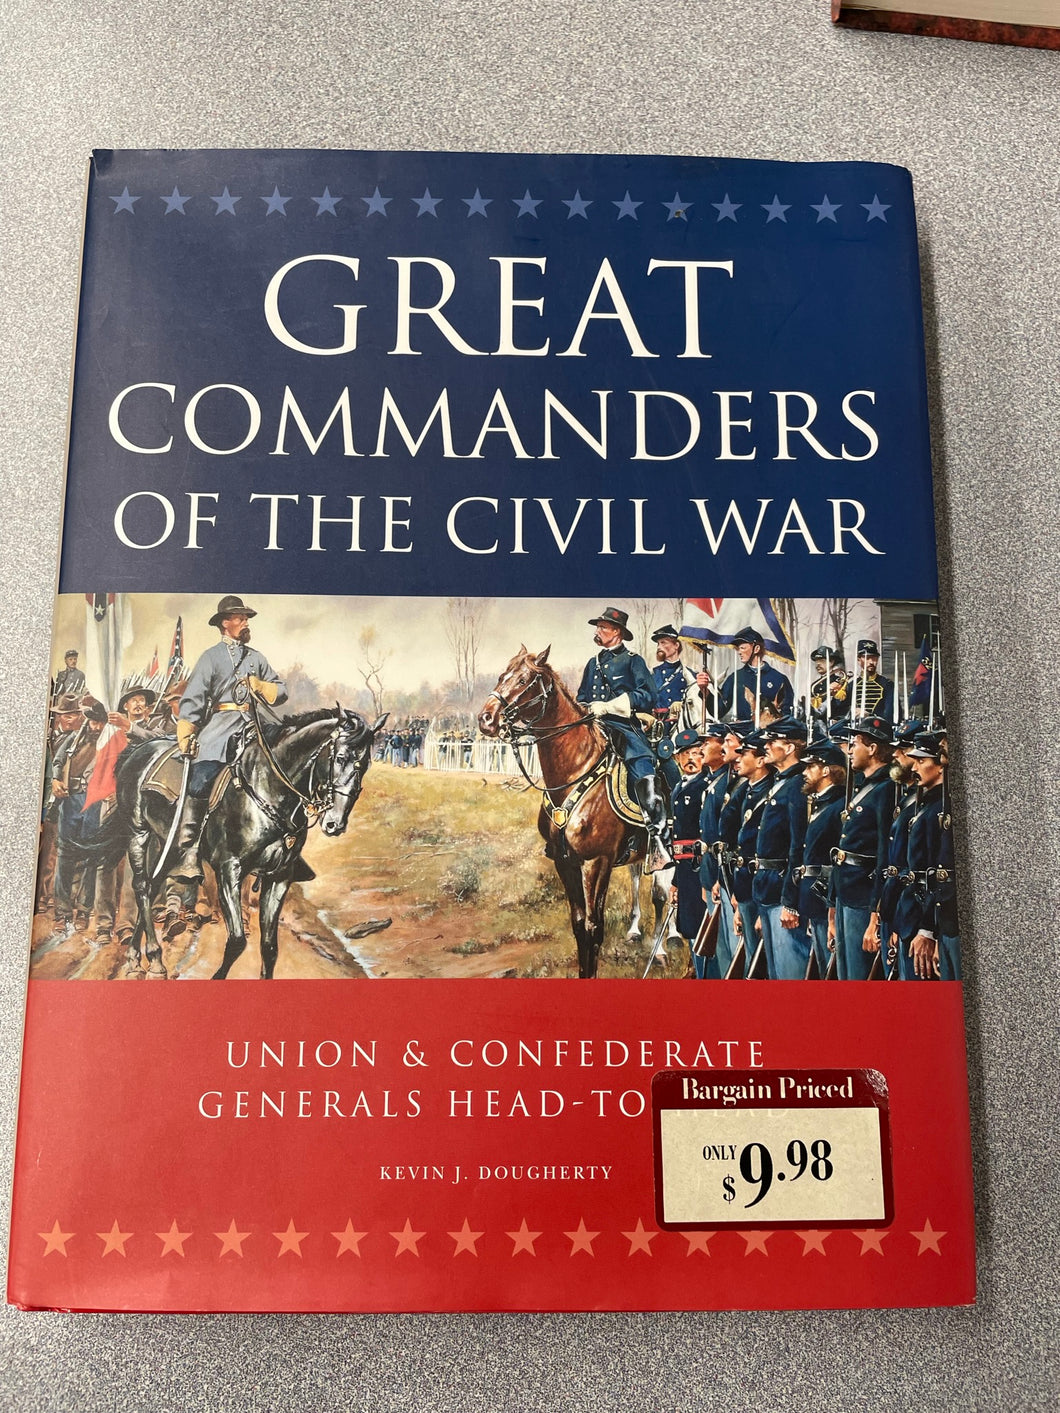 Great Commanders of the Civil War: Union and Confederate Generals Head-To-Head, Dougherty, Kevin J. [2009] ML 9/23